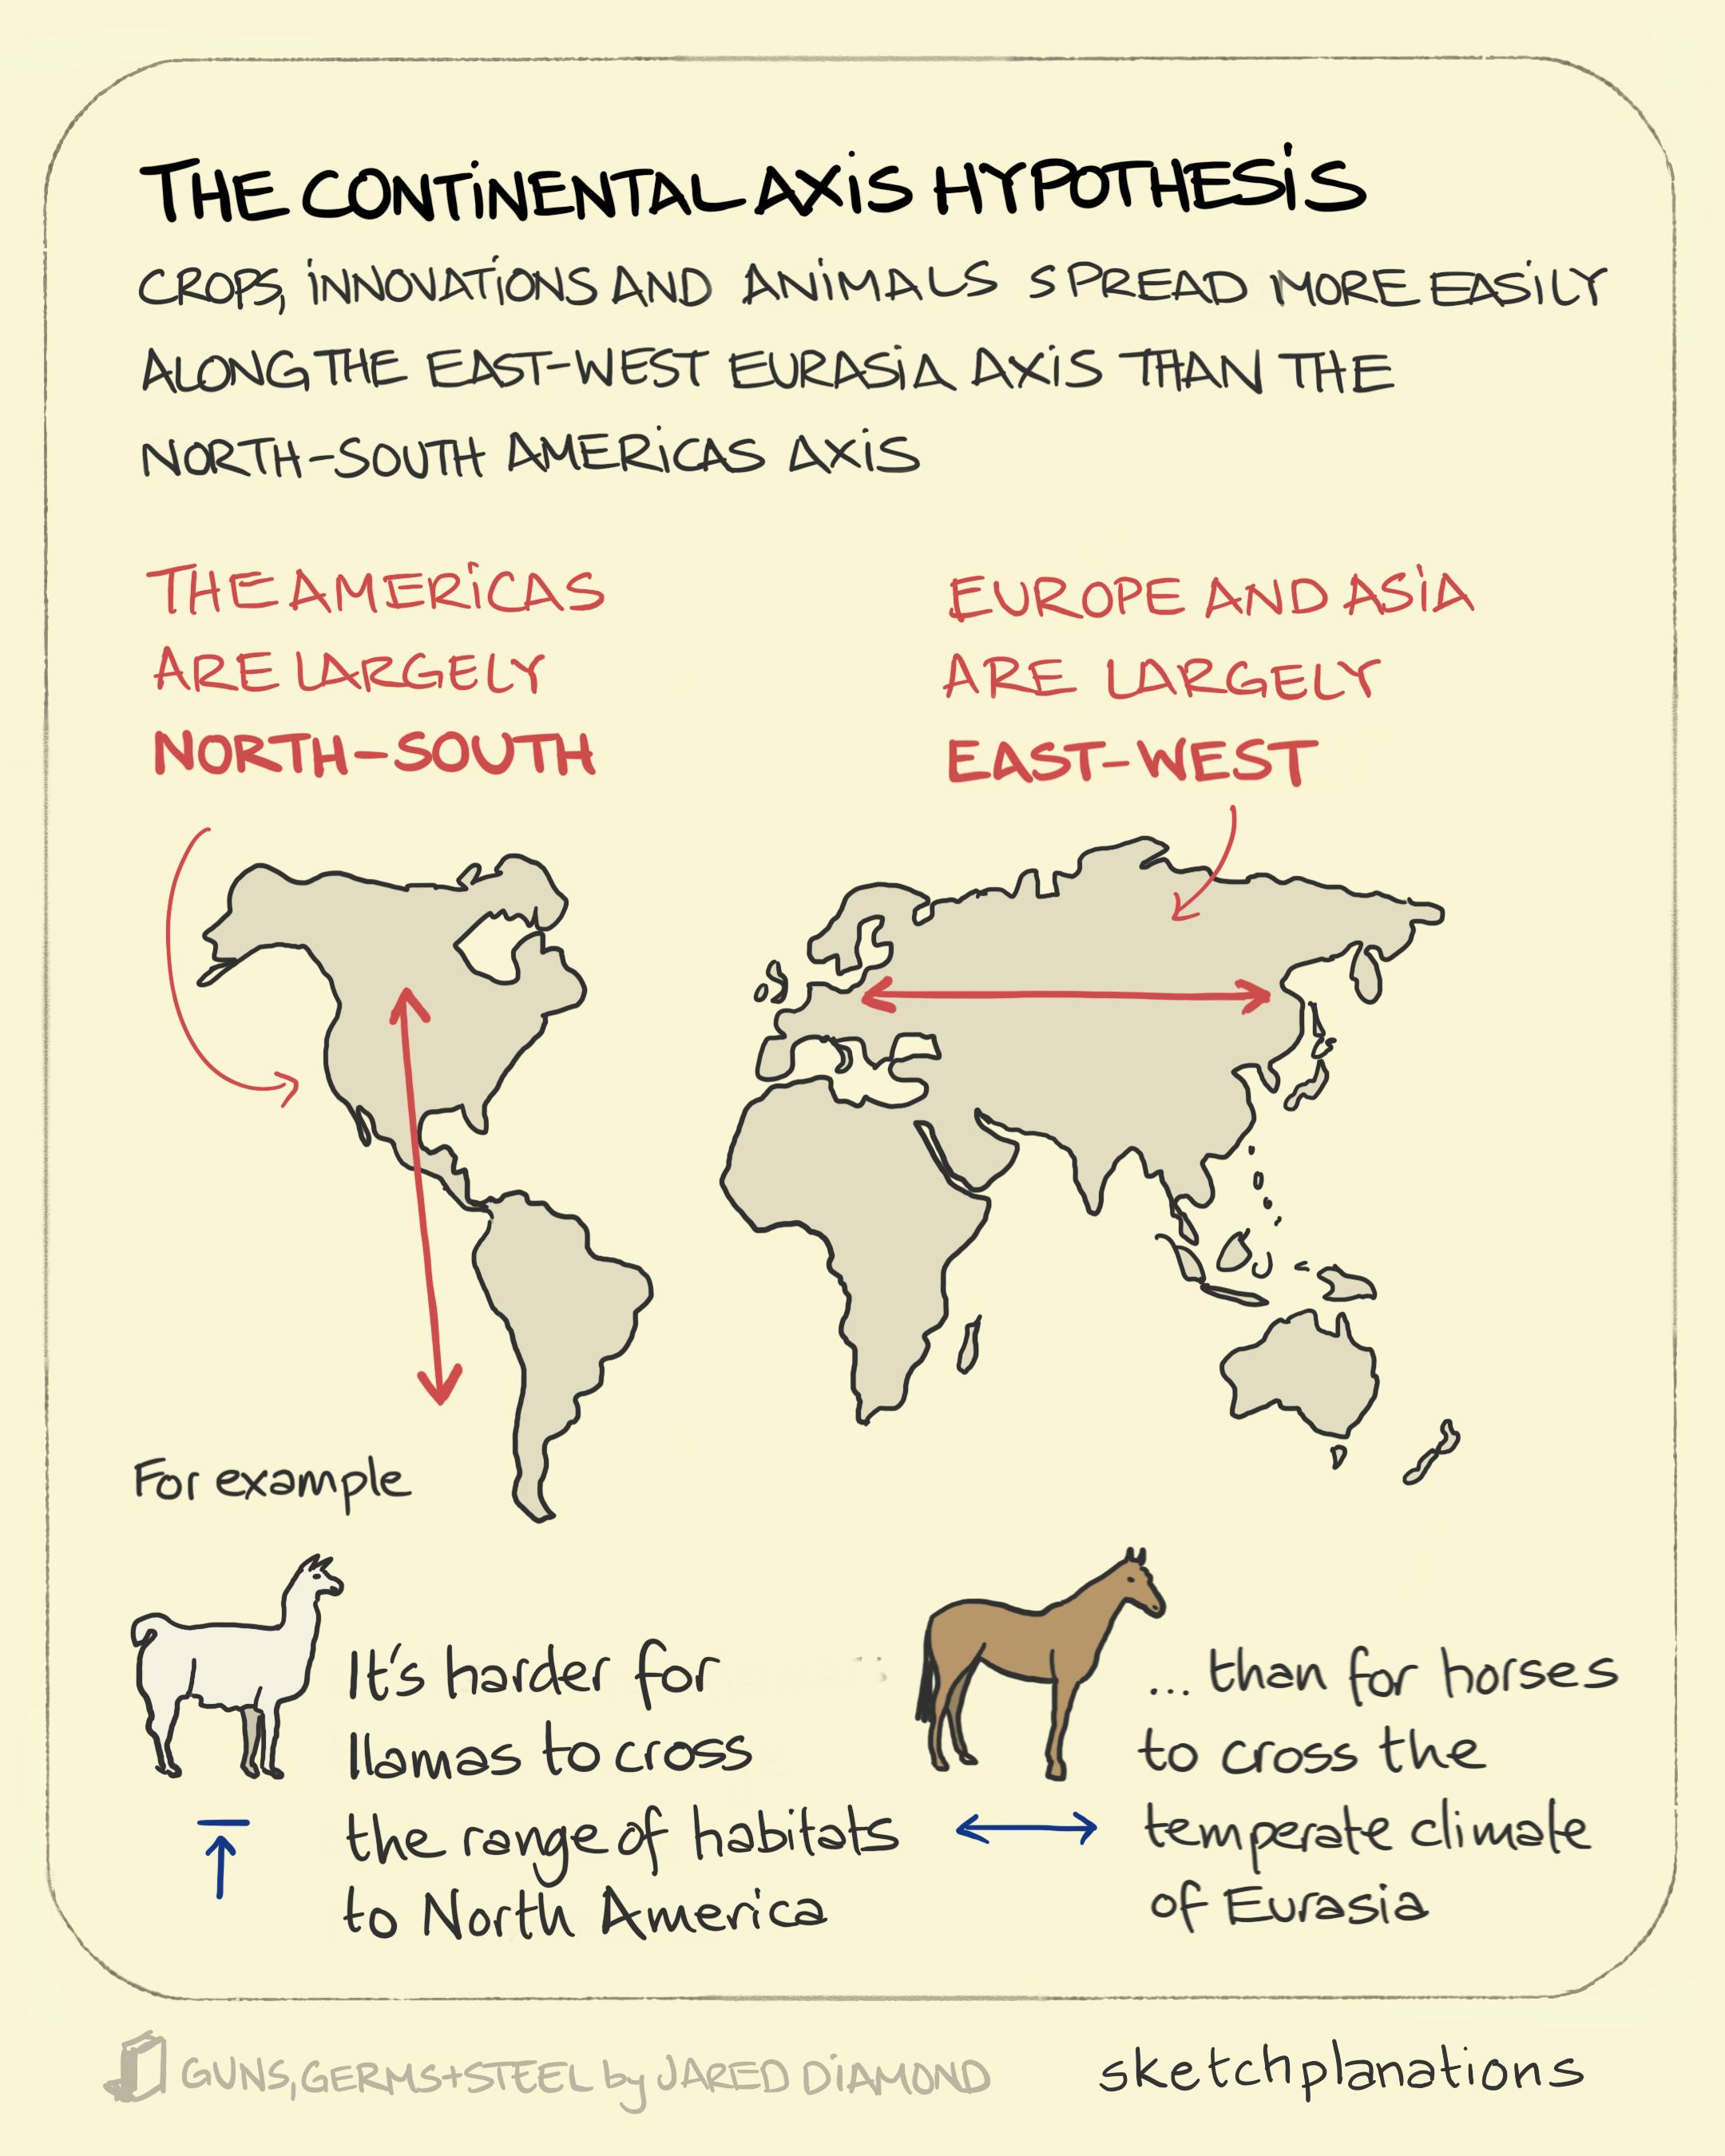 The continental axis hypothesis: from Jared Diamond's Guns, Germs and Steel, illustrating how the llama didn't manage to travel North-South